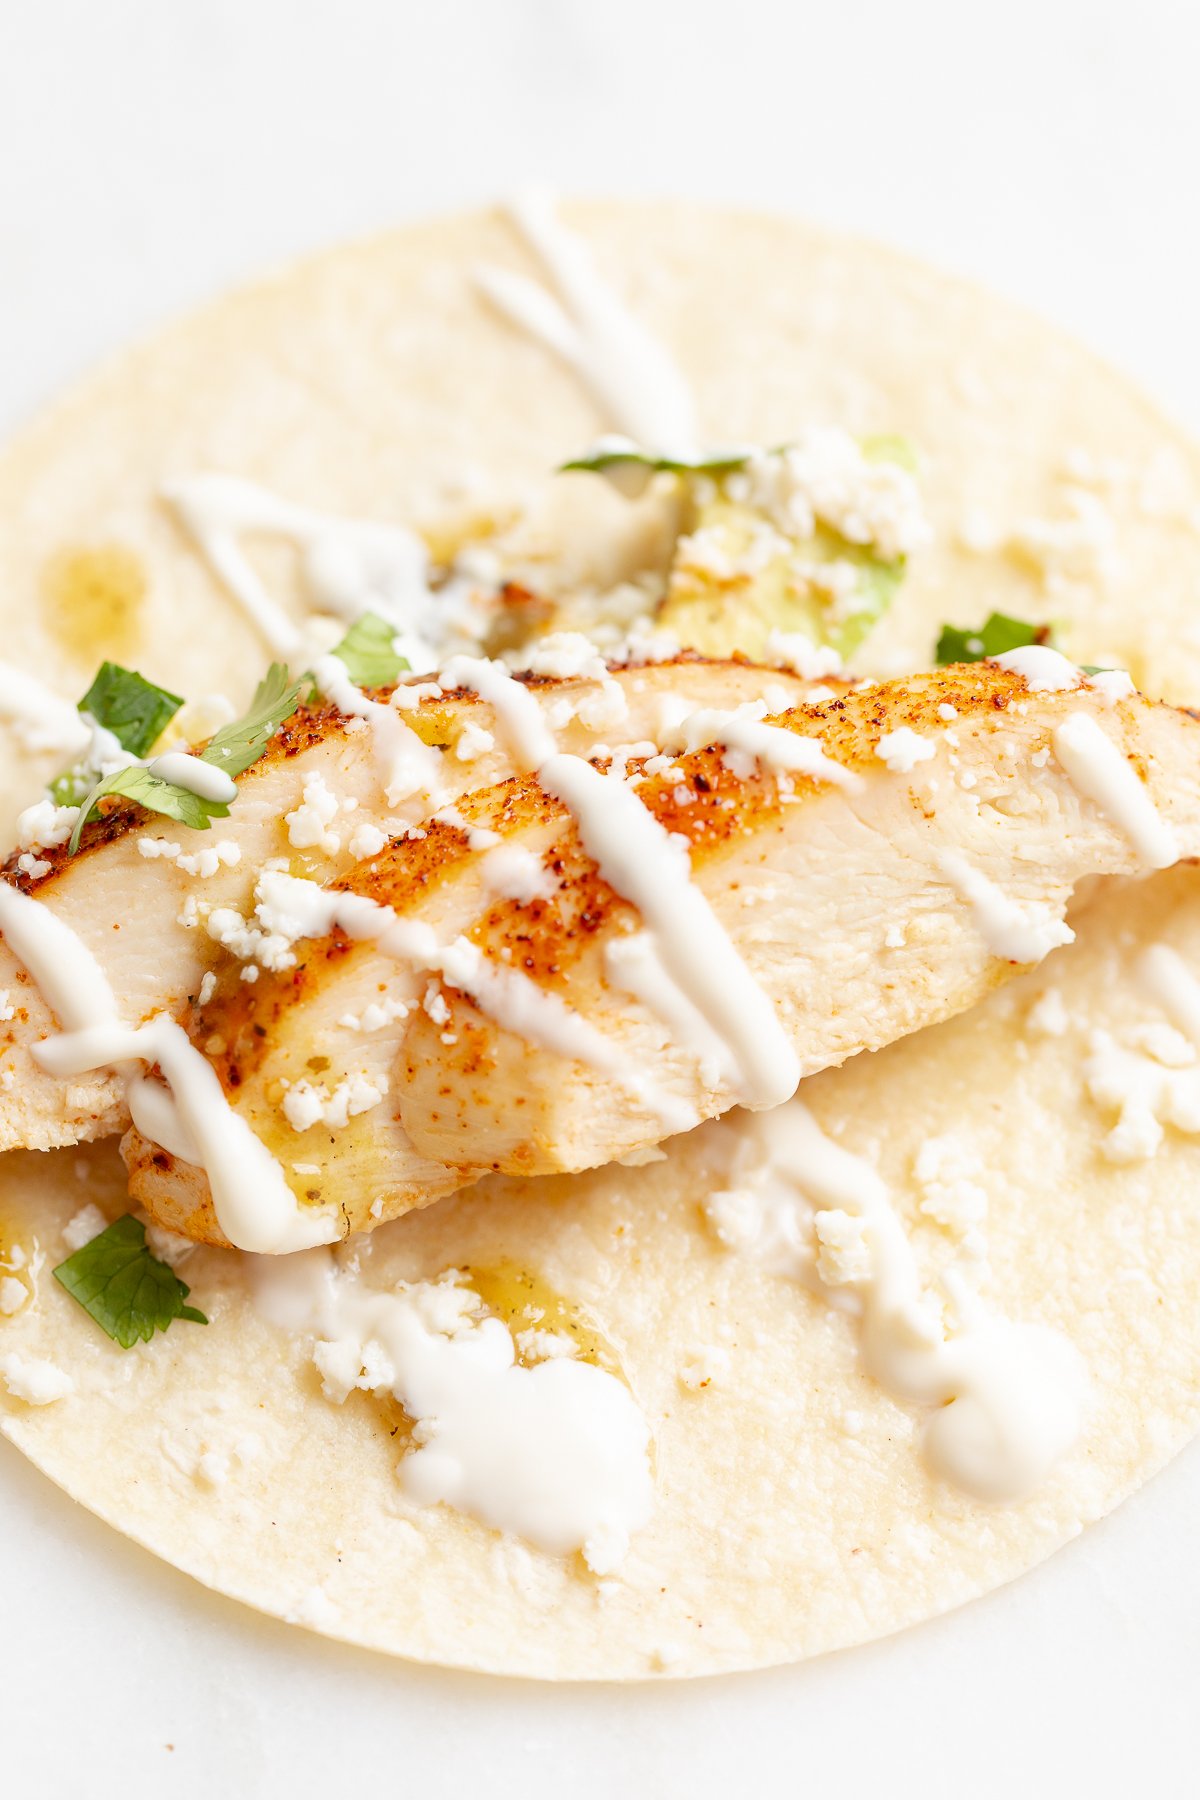 Chicken tacos in corn tortillas on a white surface.